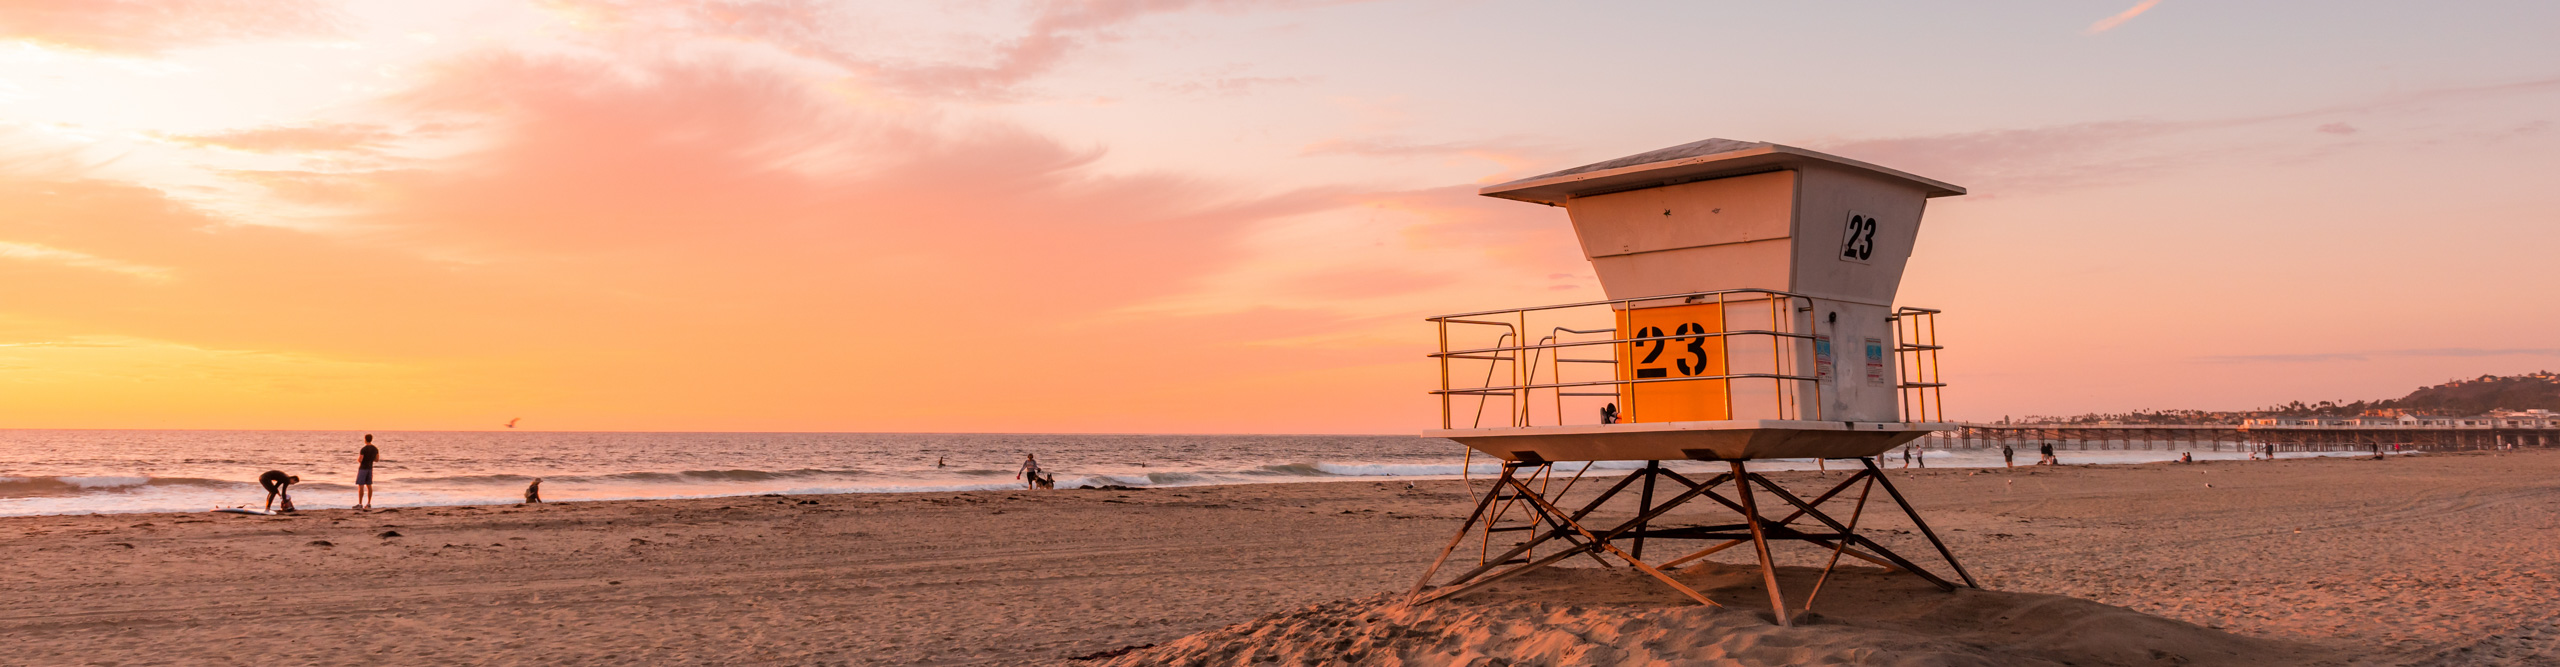 Lifeguard Tower on the beach at sunset in California, with pink skies and clouds and waves crashing